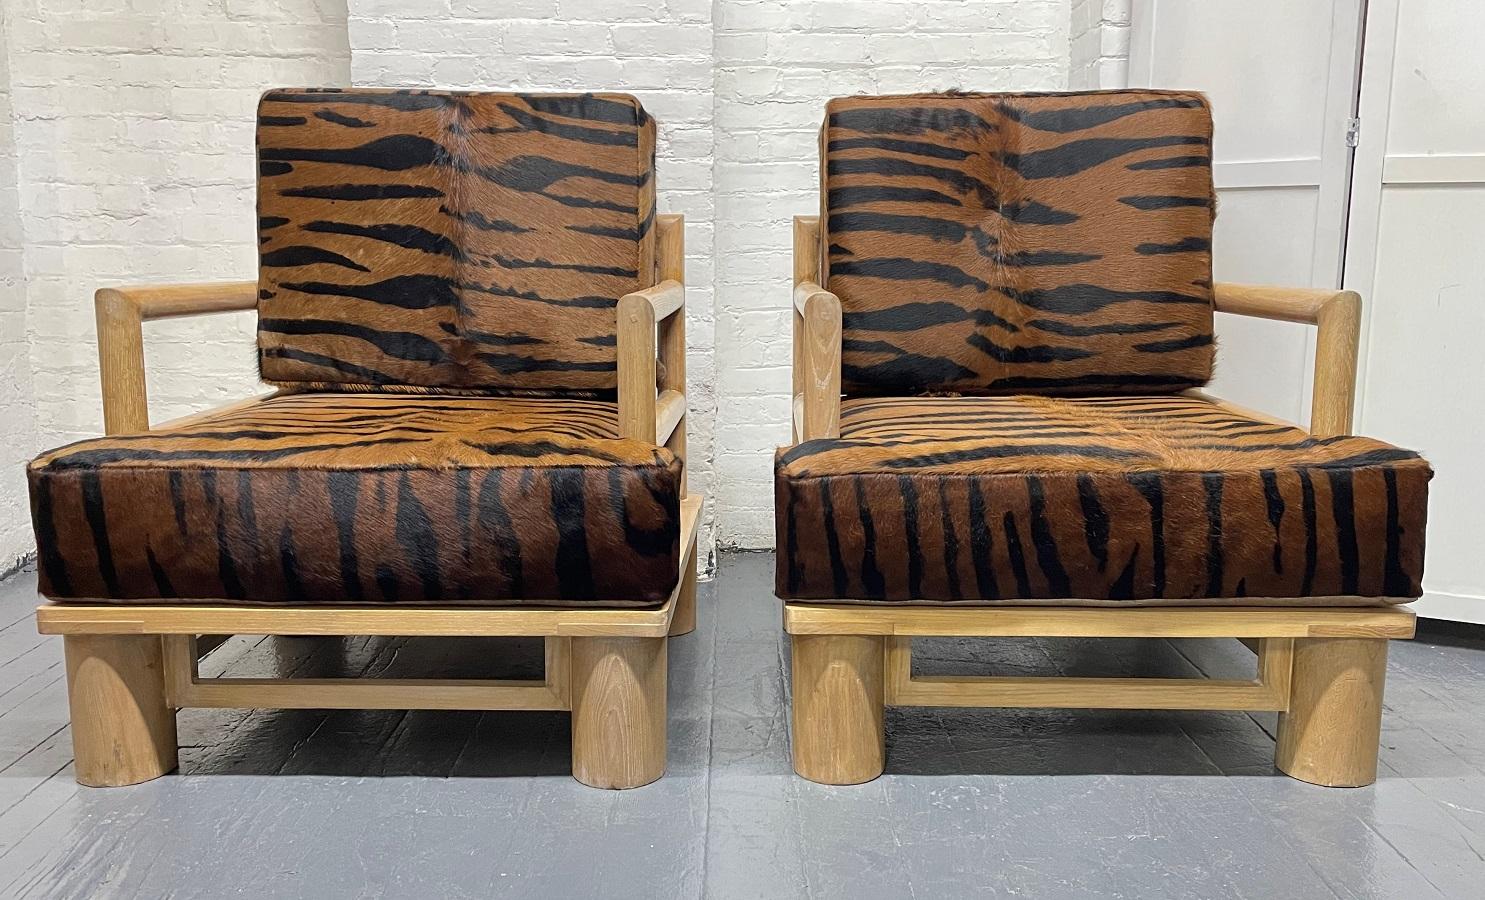 Pair of dowel Cerused wood lounge chairs in Zebra Hide. The chairs are well made, sturdy with zebra hide upholstery.